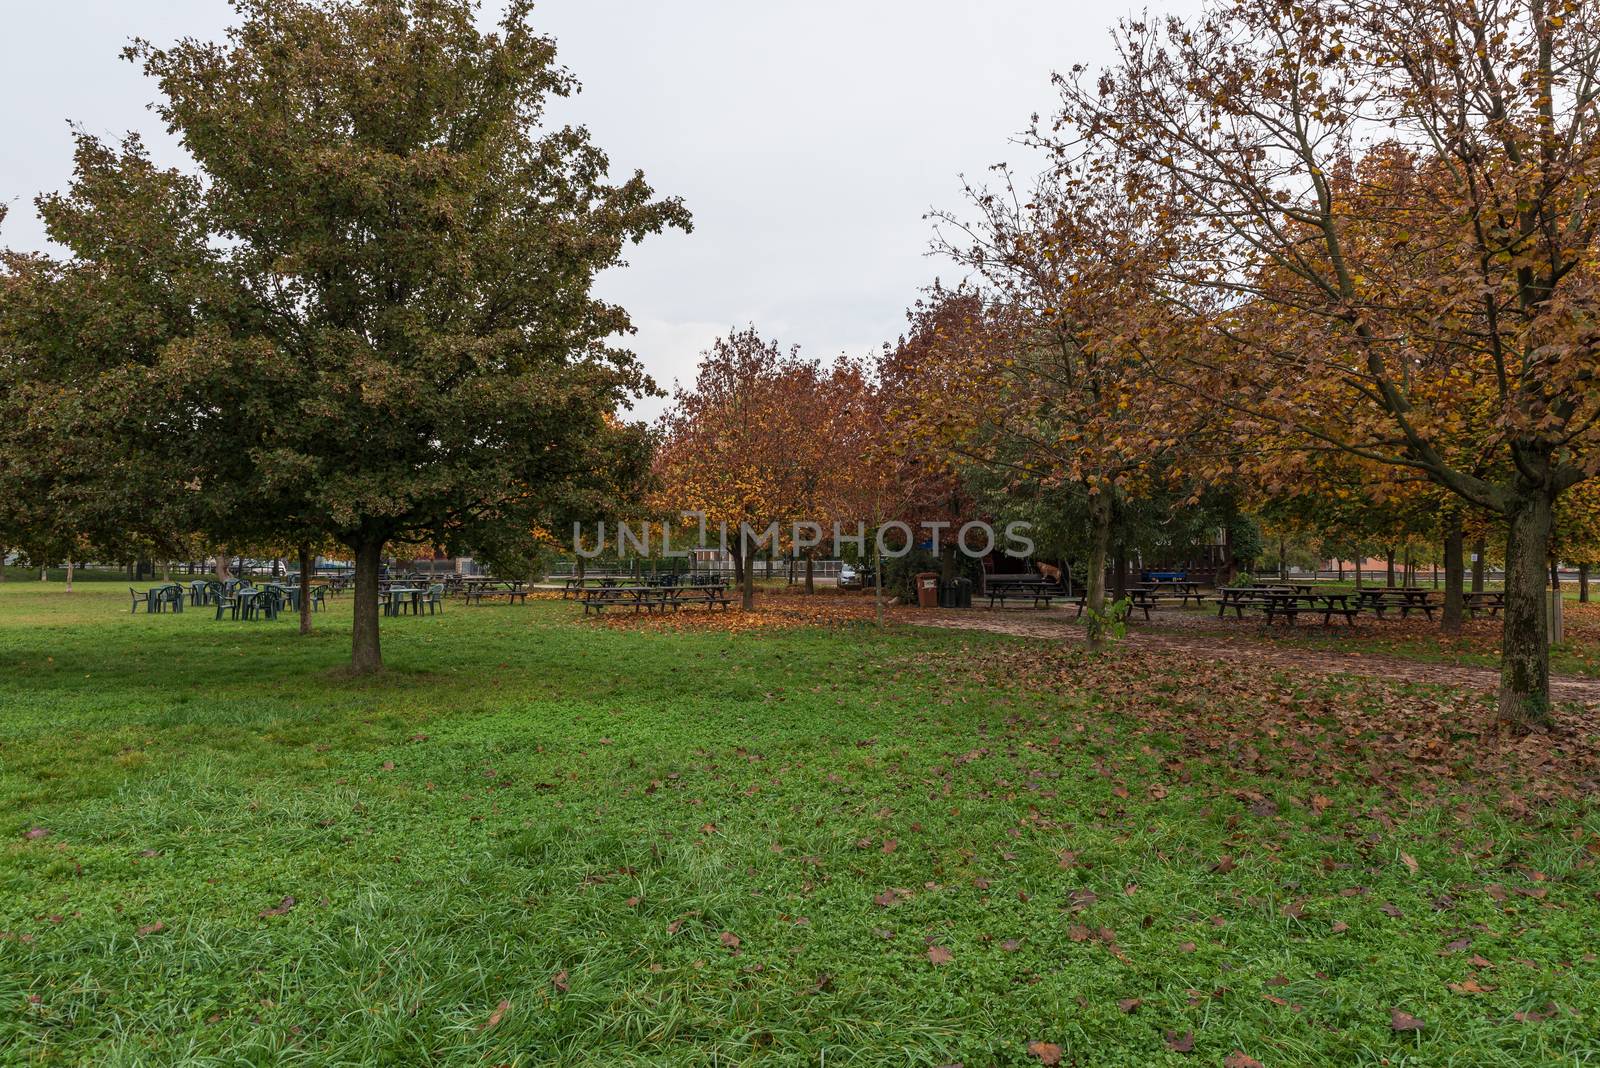 City park on an autumn morning, outdoor images